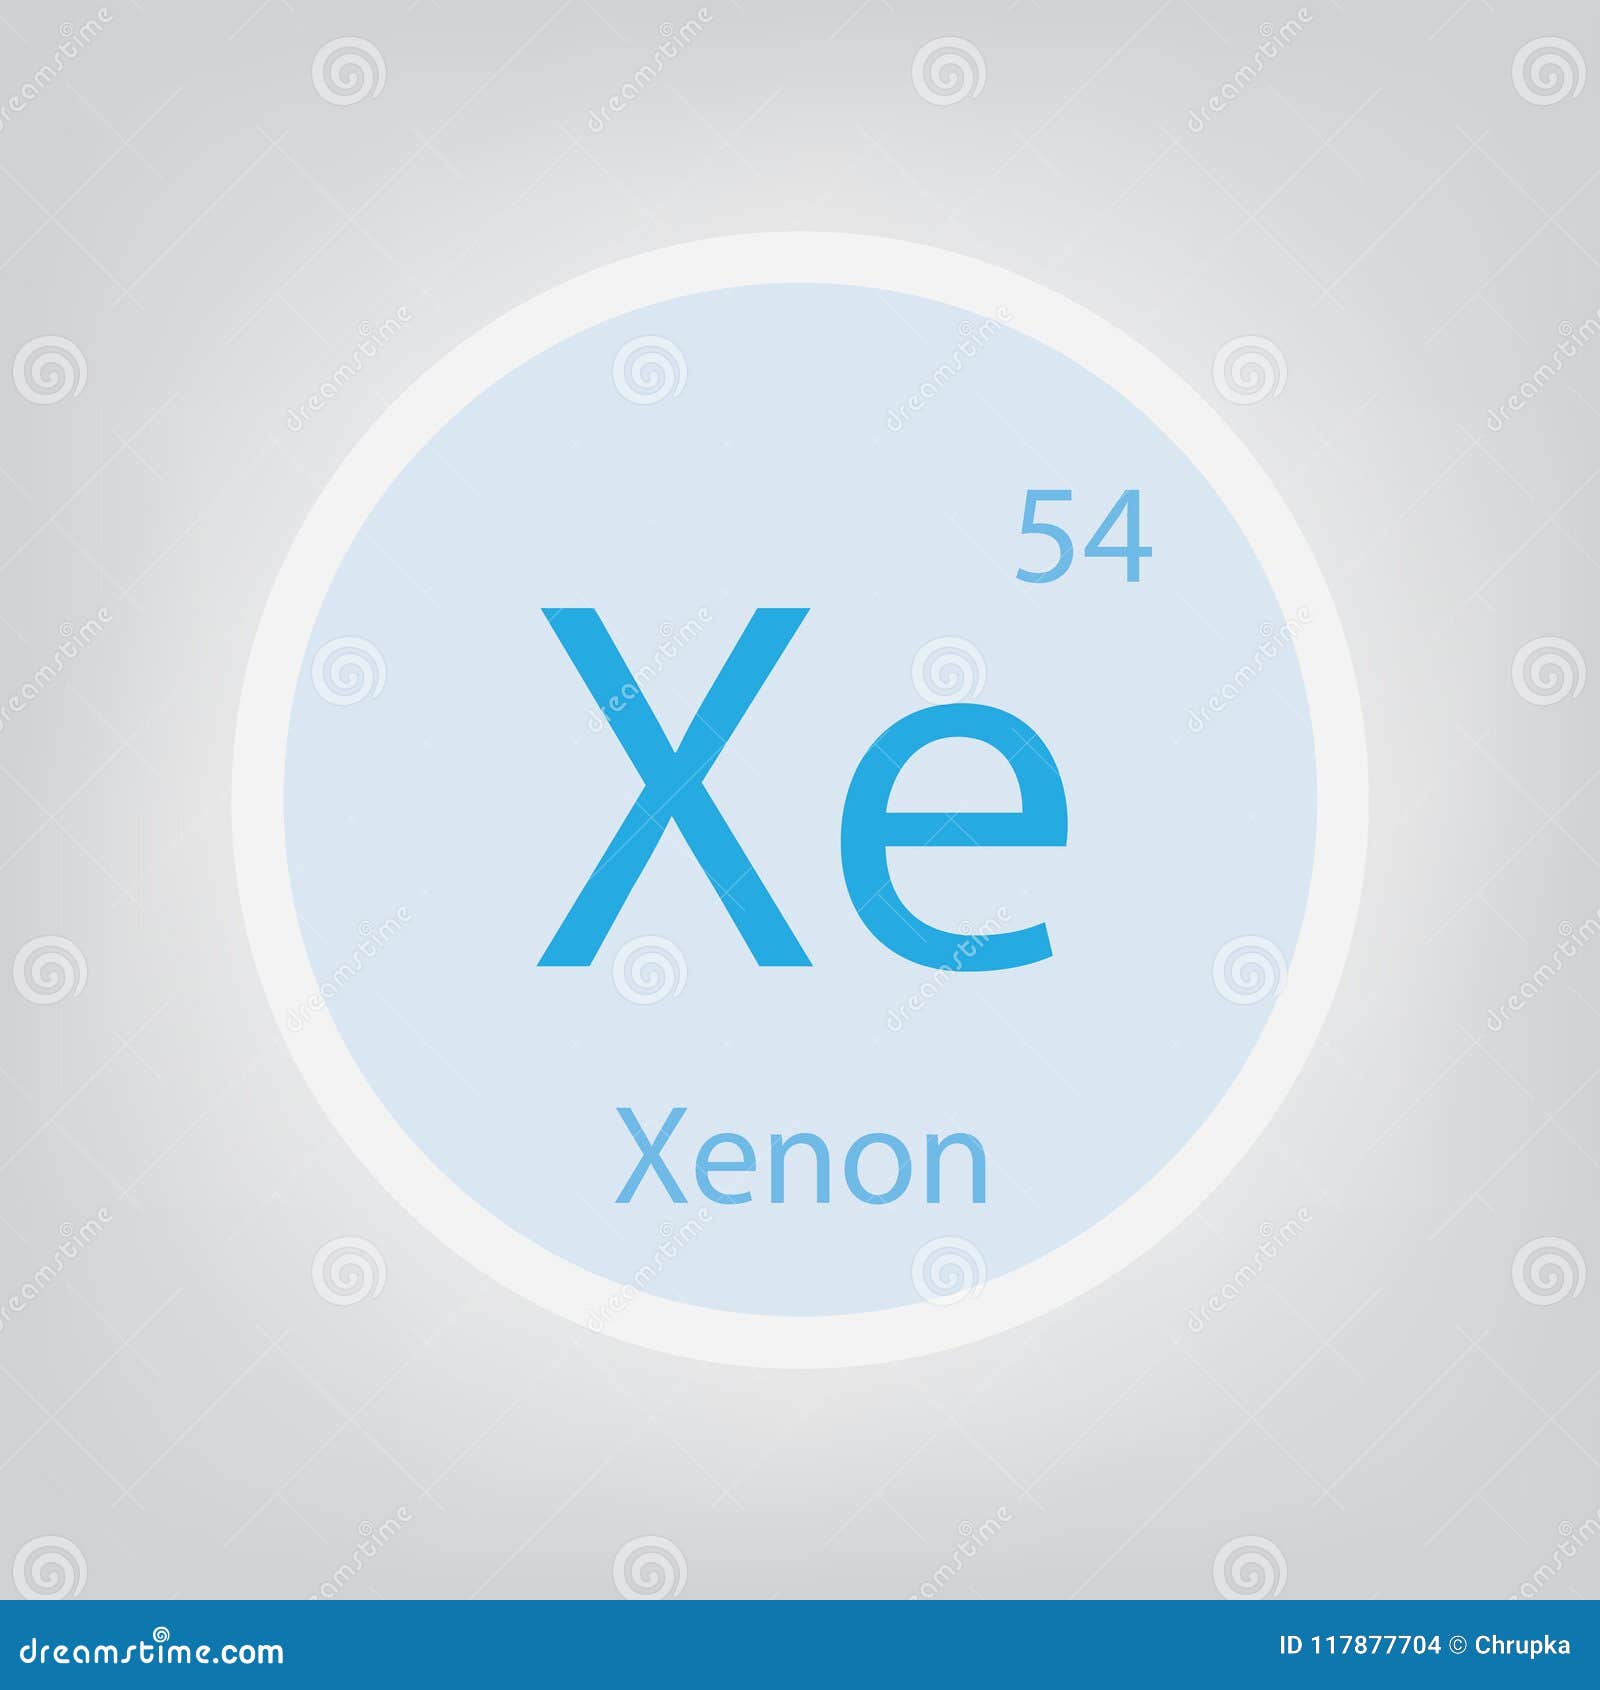 Xenon Xe Chemical Element Icon Stock Vector - Illustration of weight ...